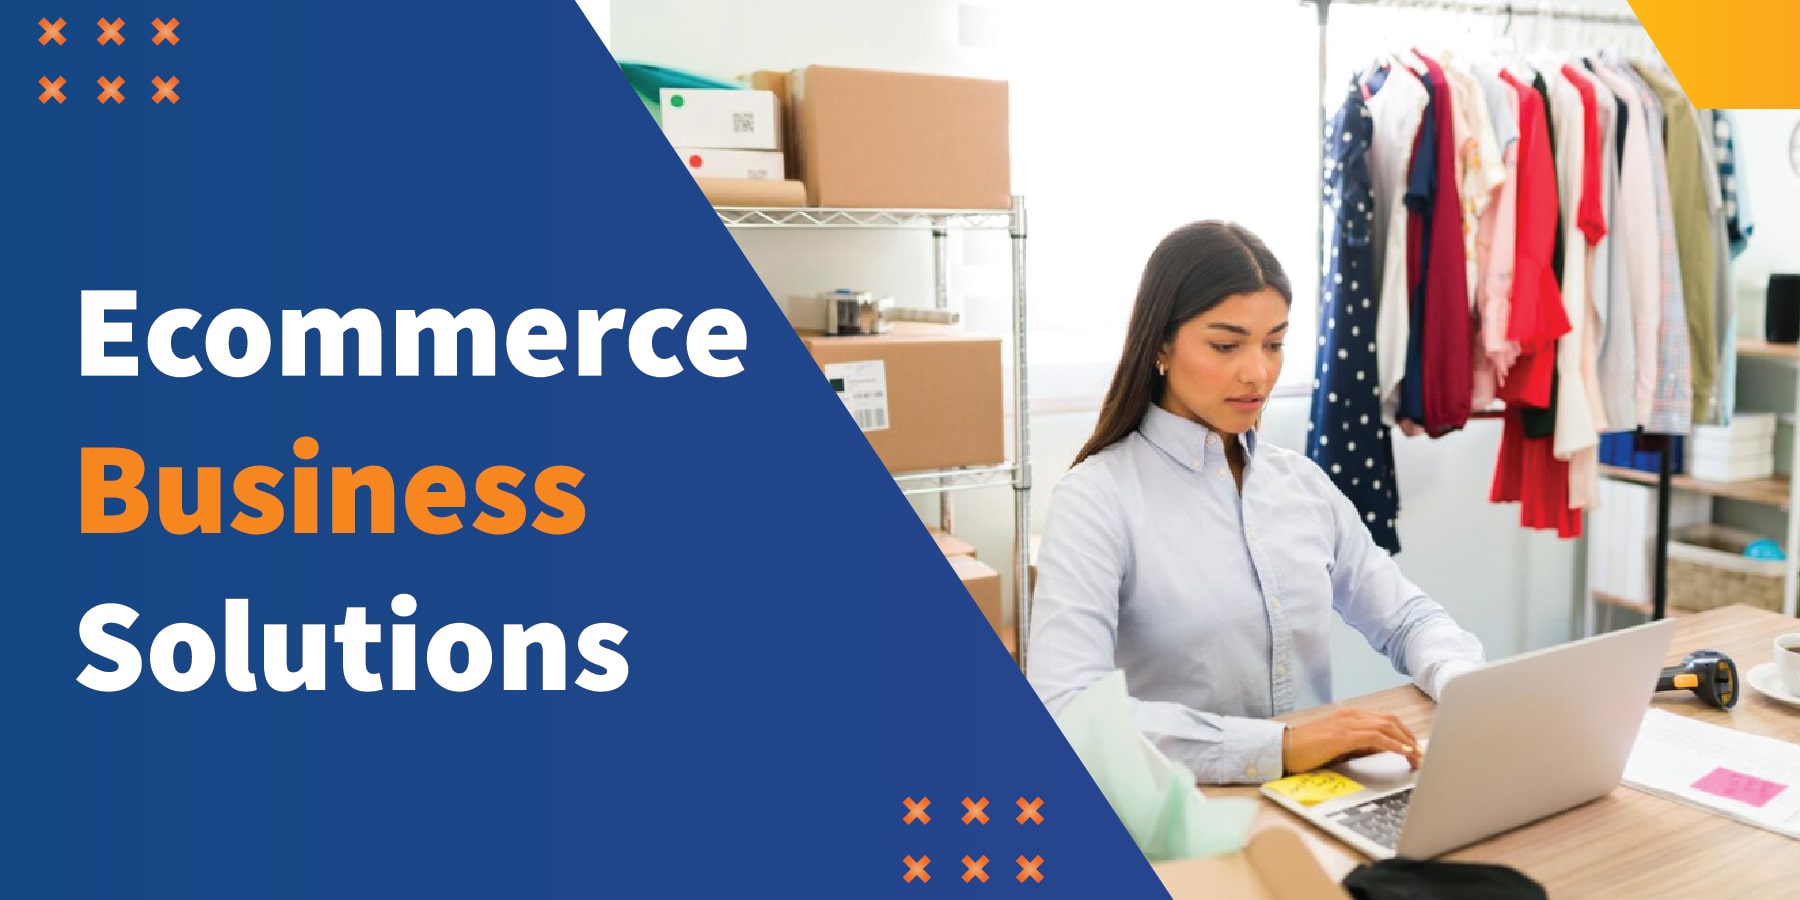 vserve | The Role of Cross Reference in eCommerce: Why It Matters